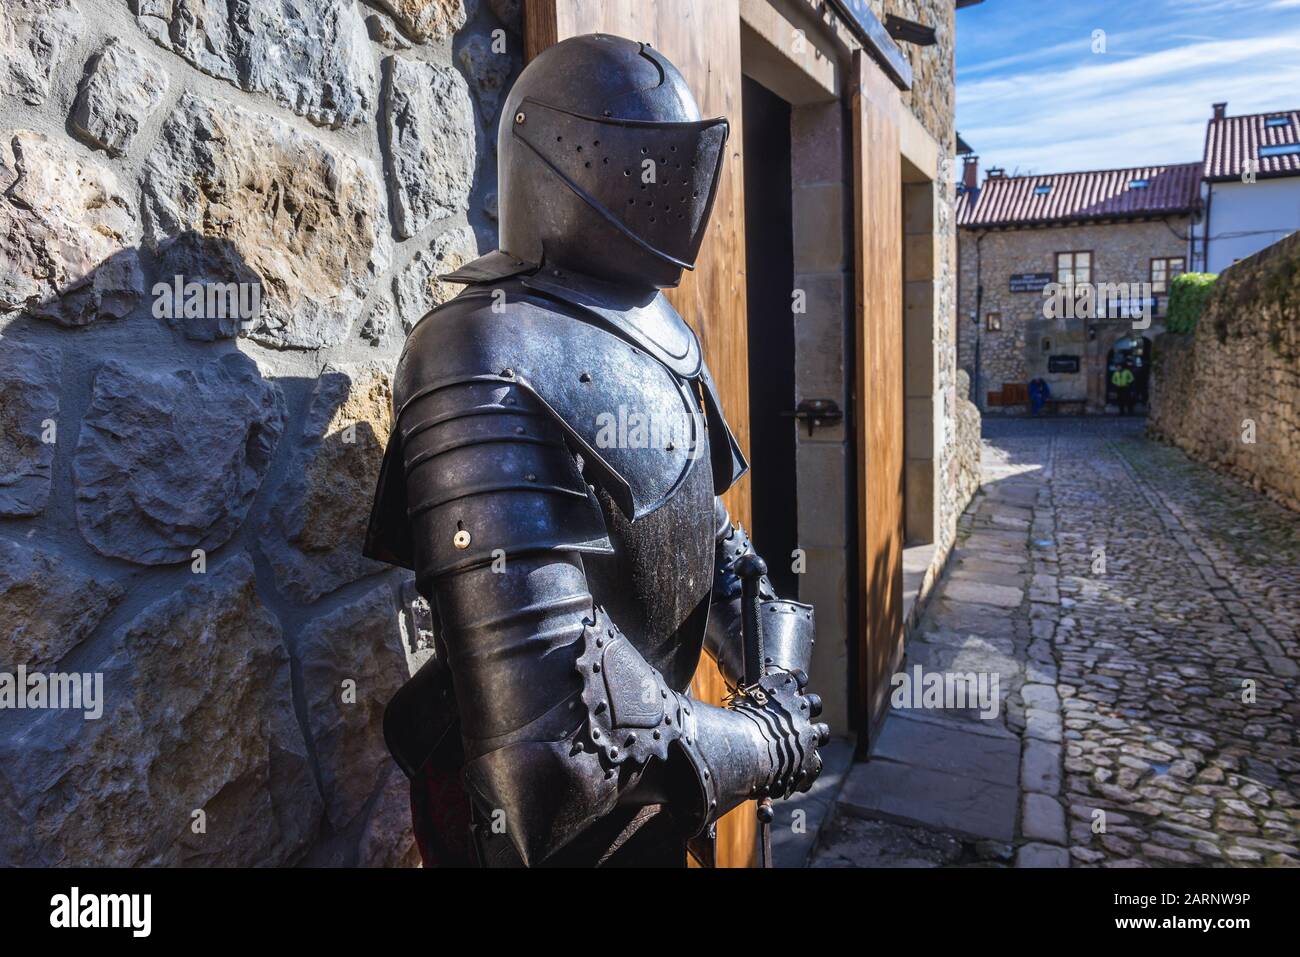 Knighty armour in front of Museum of Torture - Inquisicion in Santillana del Mar historic town located in Cantabria autonomous community of Spain Stock Photo